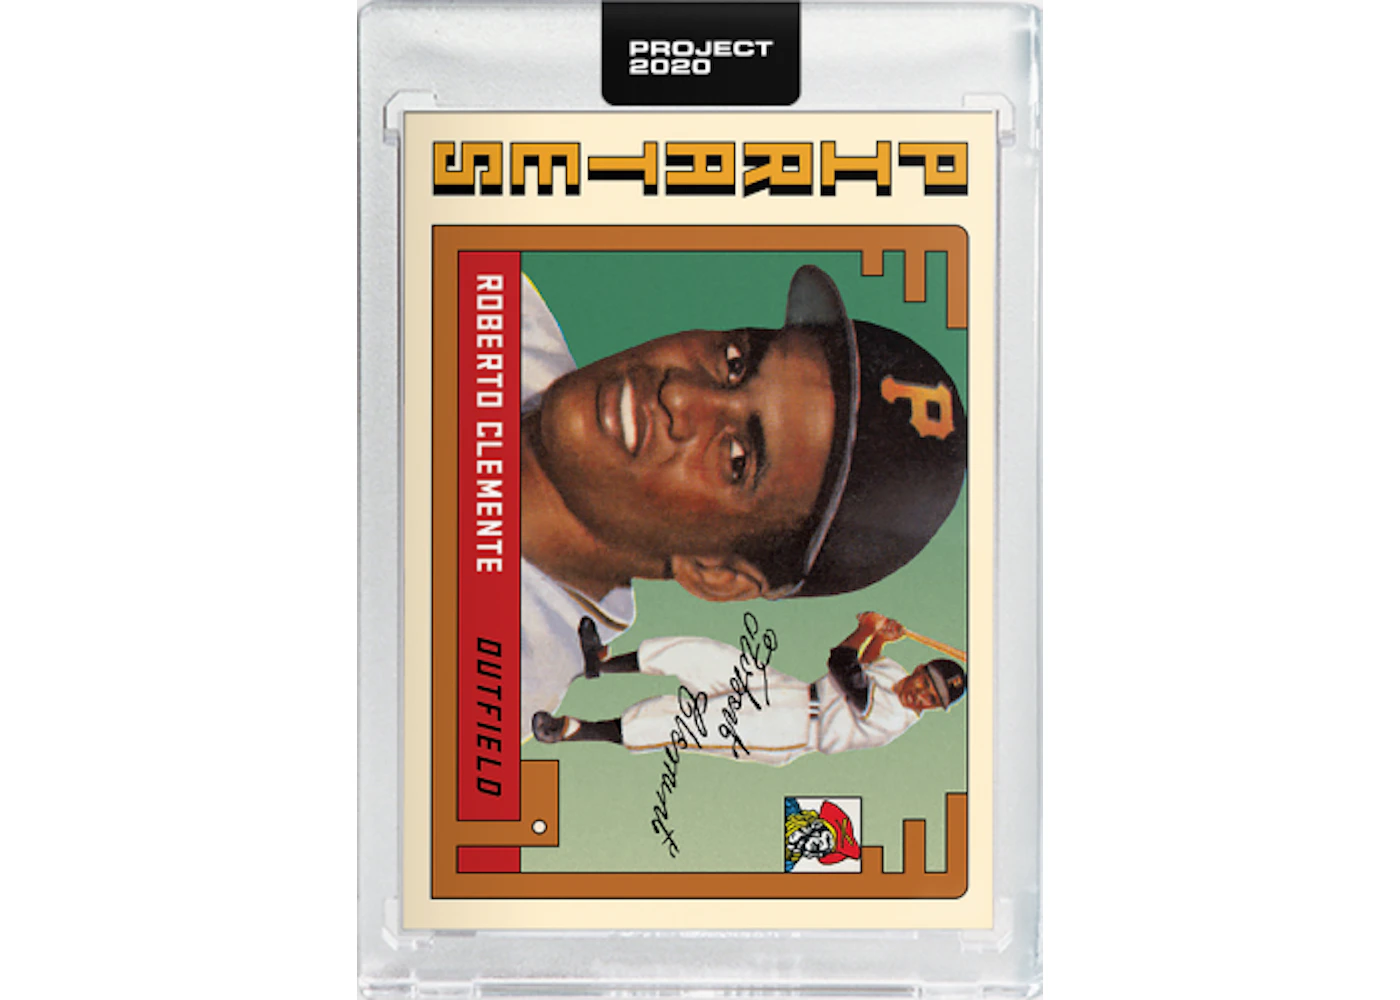 Topps Project 2020 Jackie Robinson #42 by Blake Jamieson - Print Run: 2980  (IN HAND)